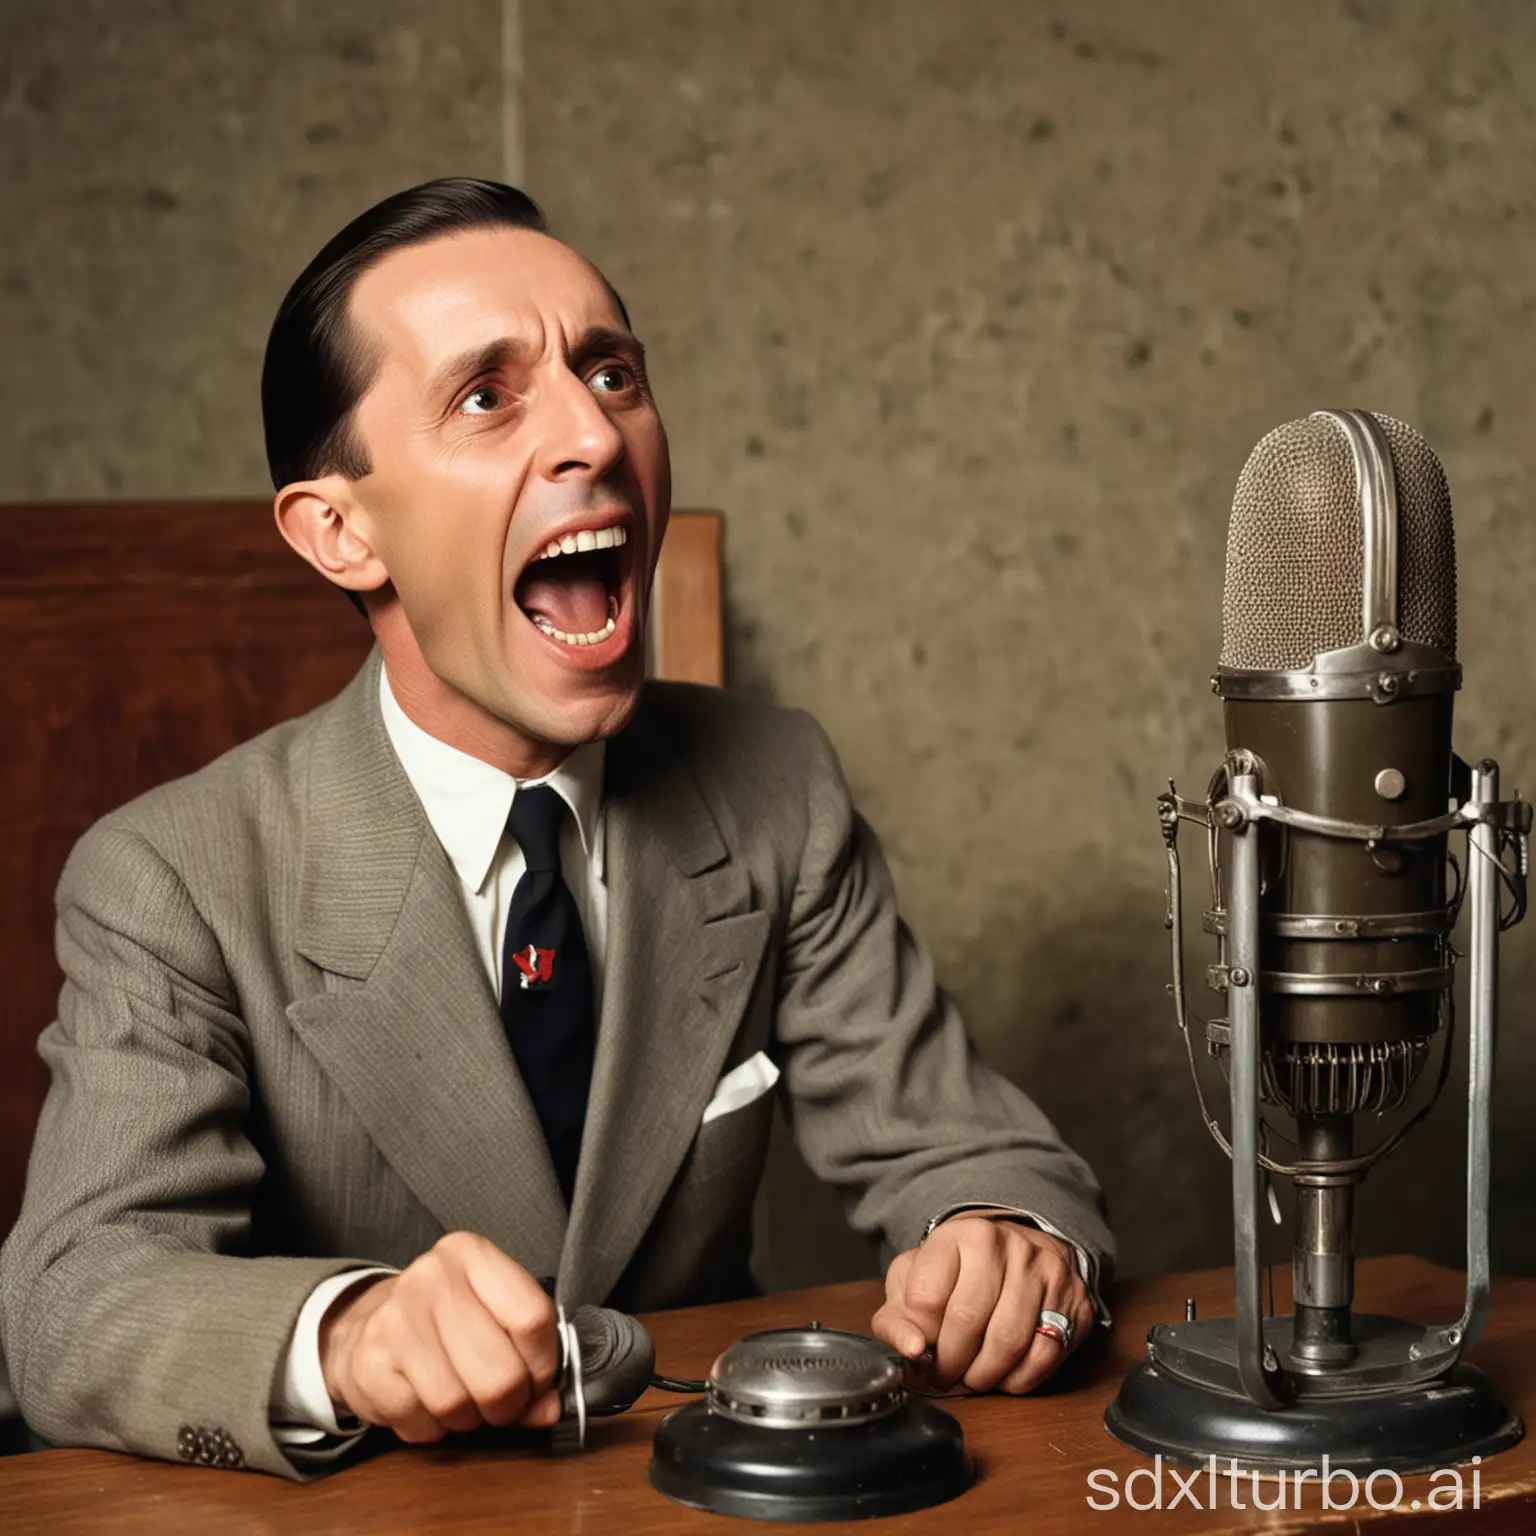 old color photo depicting Joseph Goebbels screaming in an old German radio microphone on a table